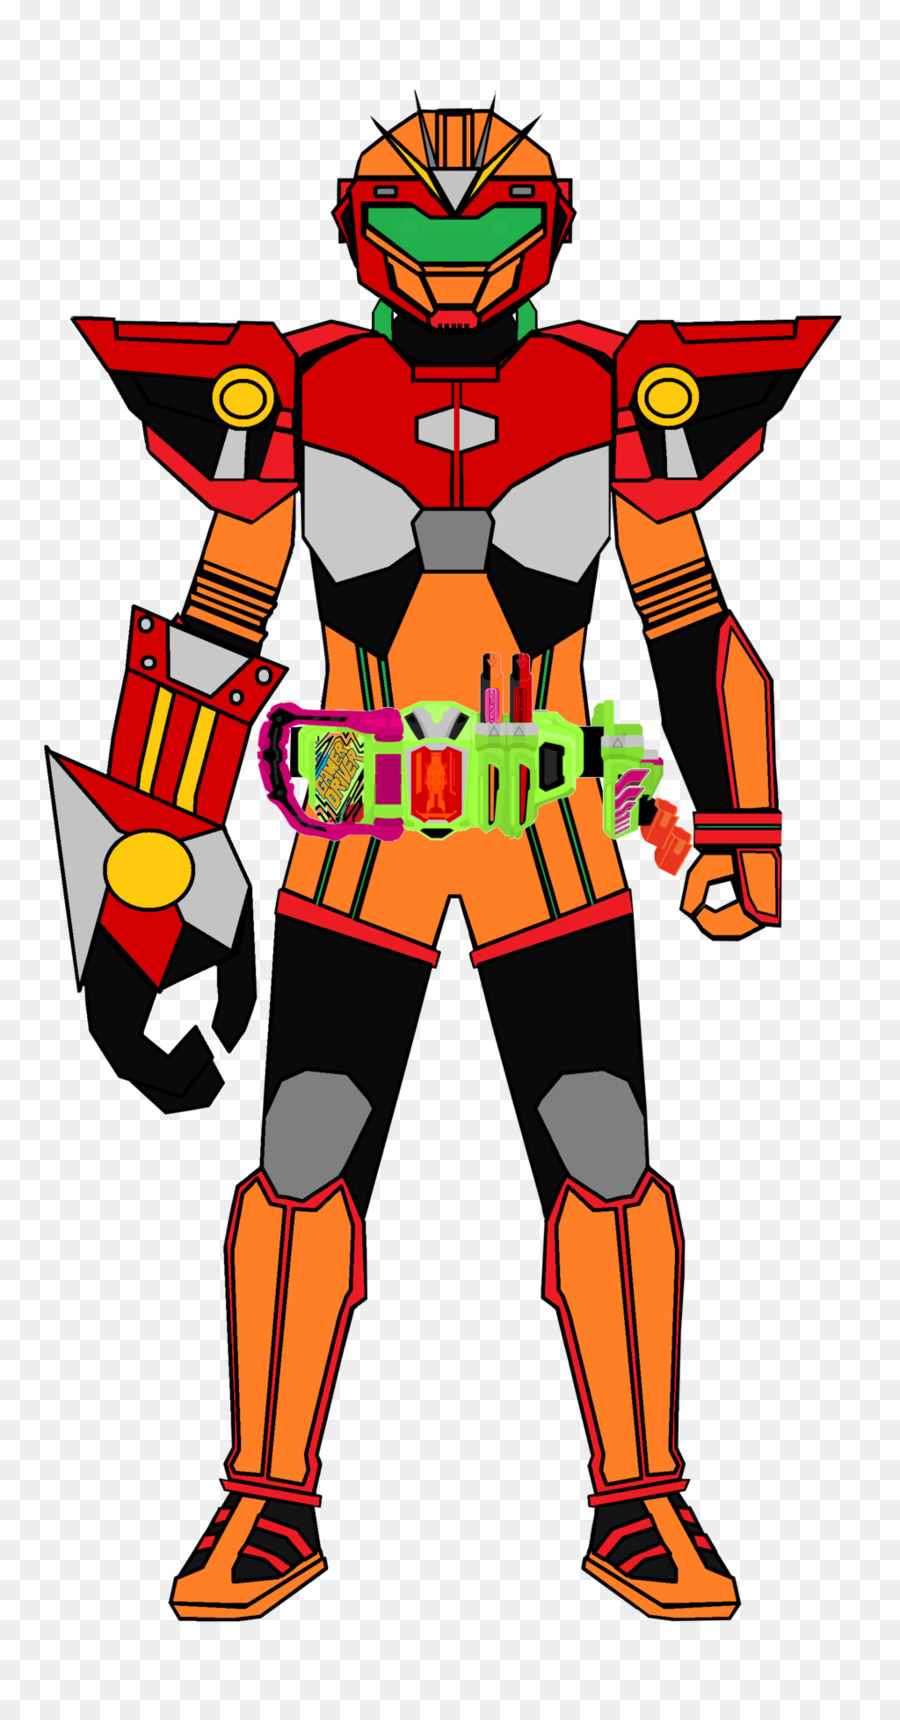 Red Ranger Power Rangers Zord Wikia - Power Rangers png download - 1024*1944 - Free Transparent Red Ranger png Download.